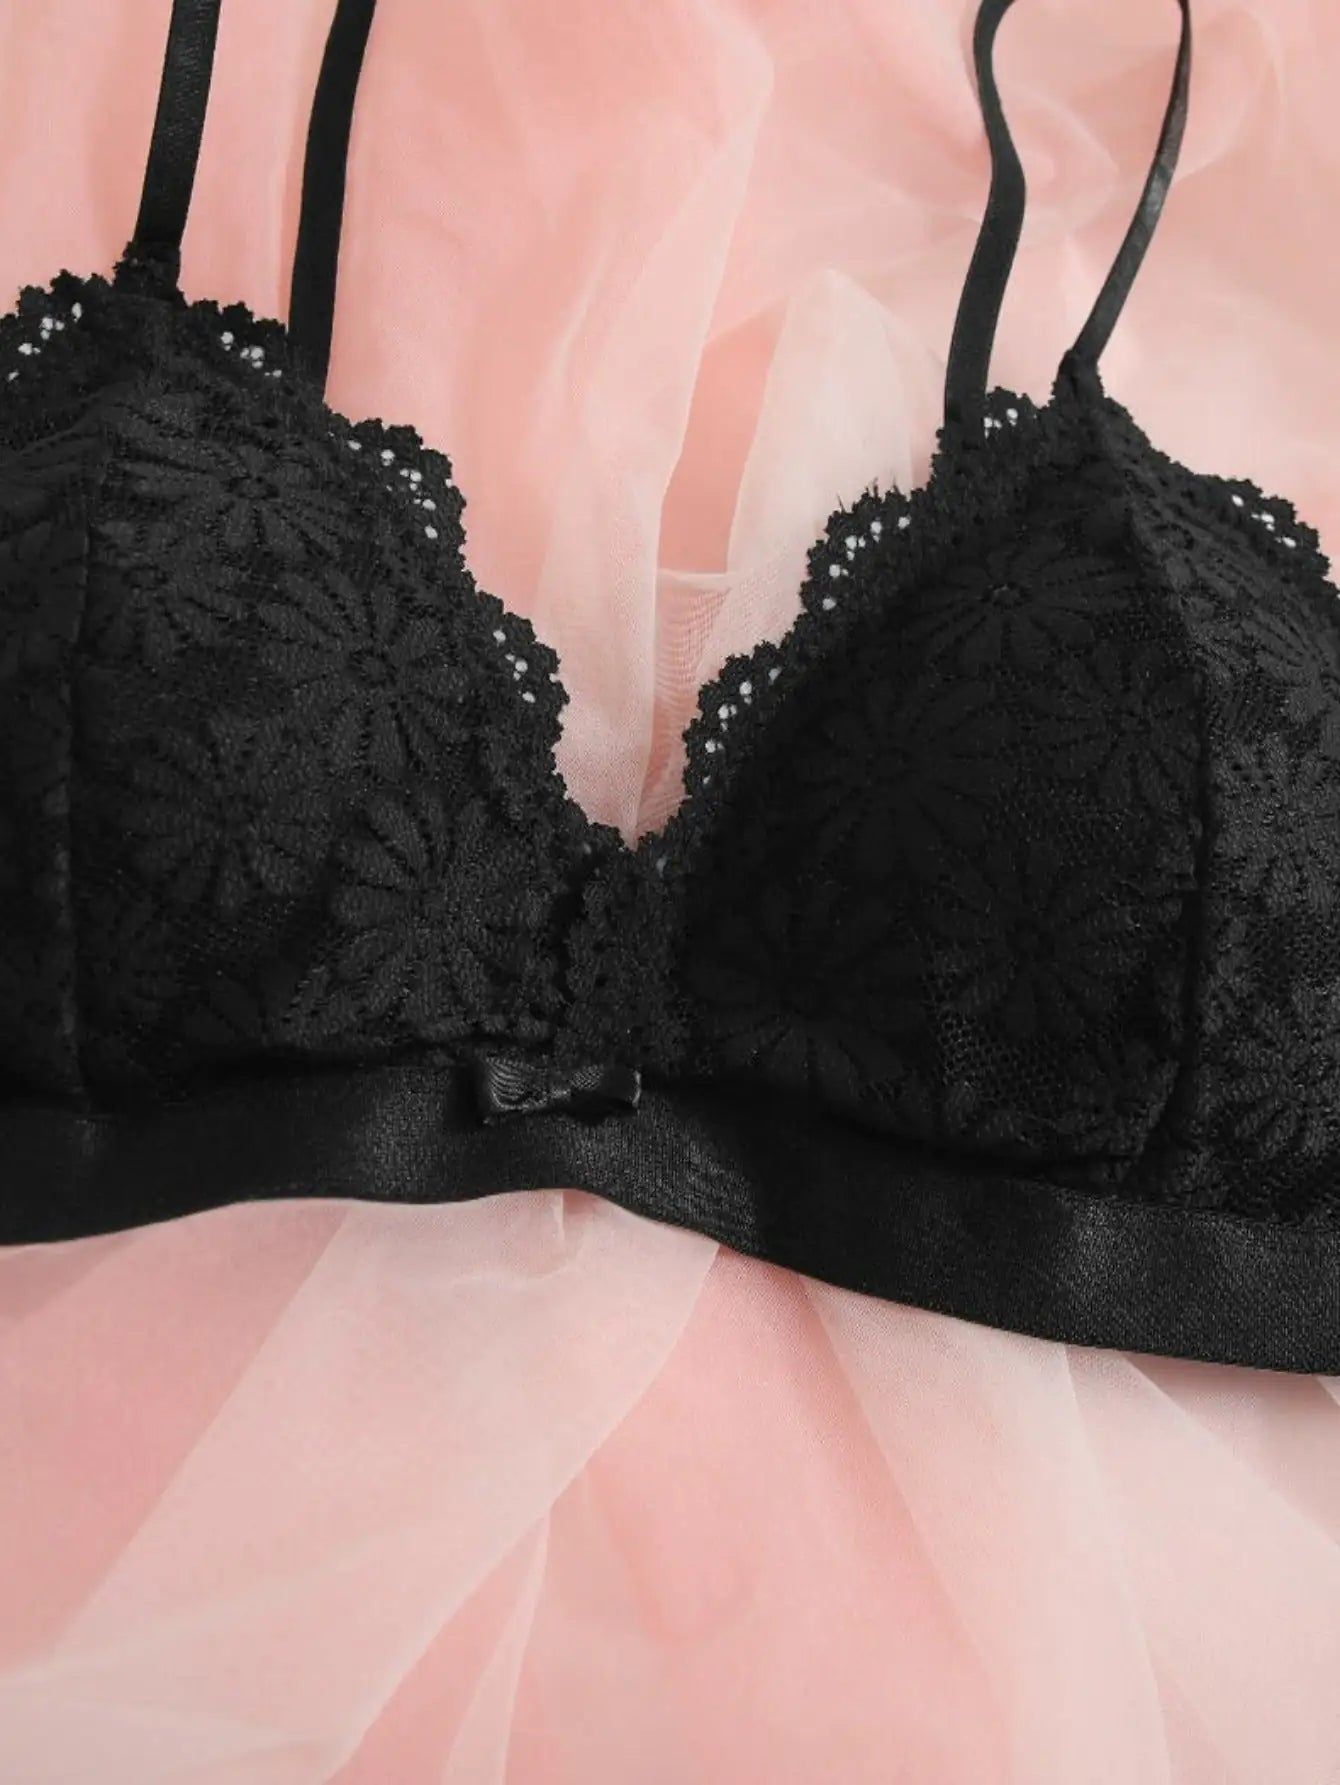 Lace Lingerie Mary - Alex's Store - Black/Begie/White - 